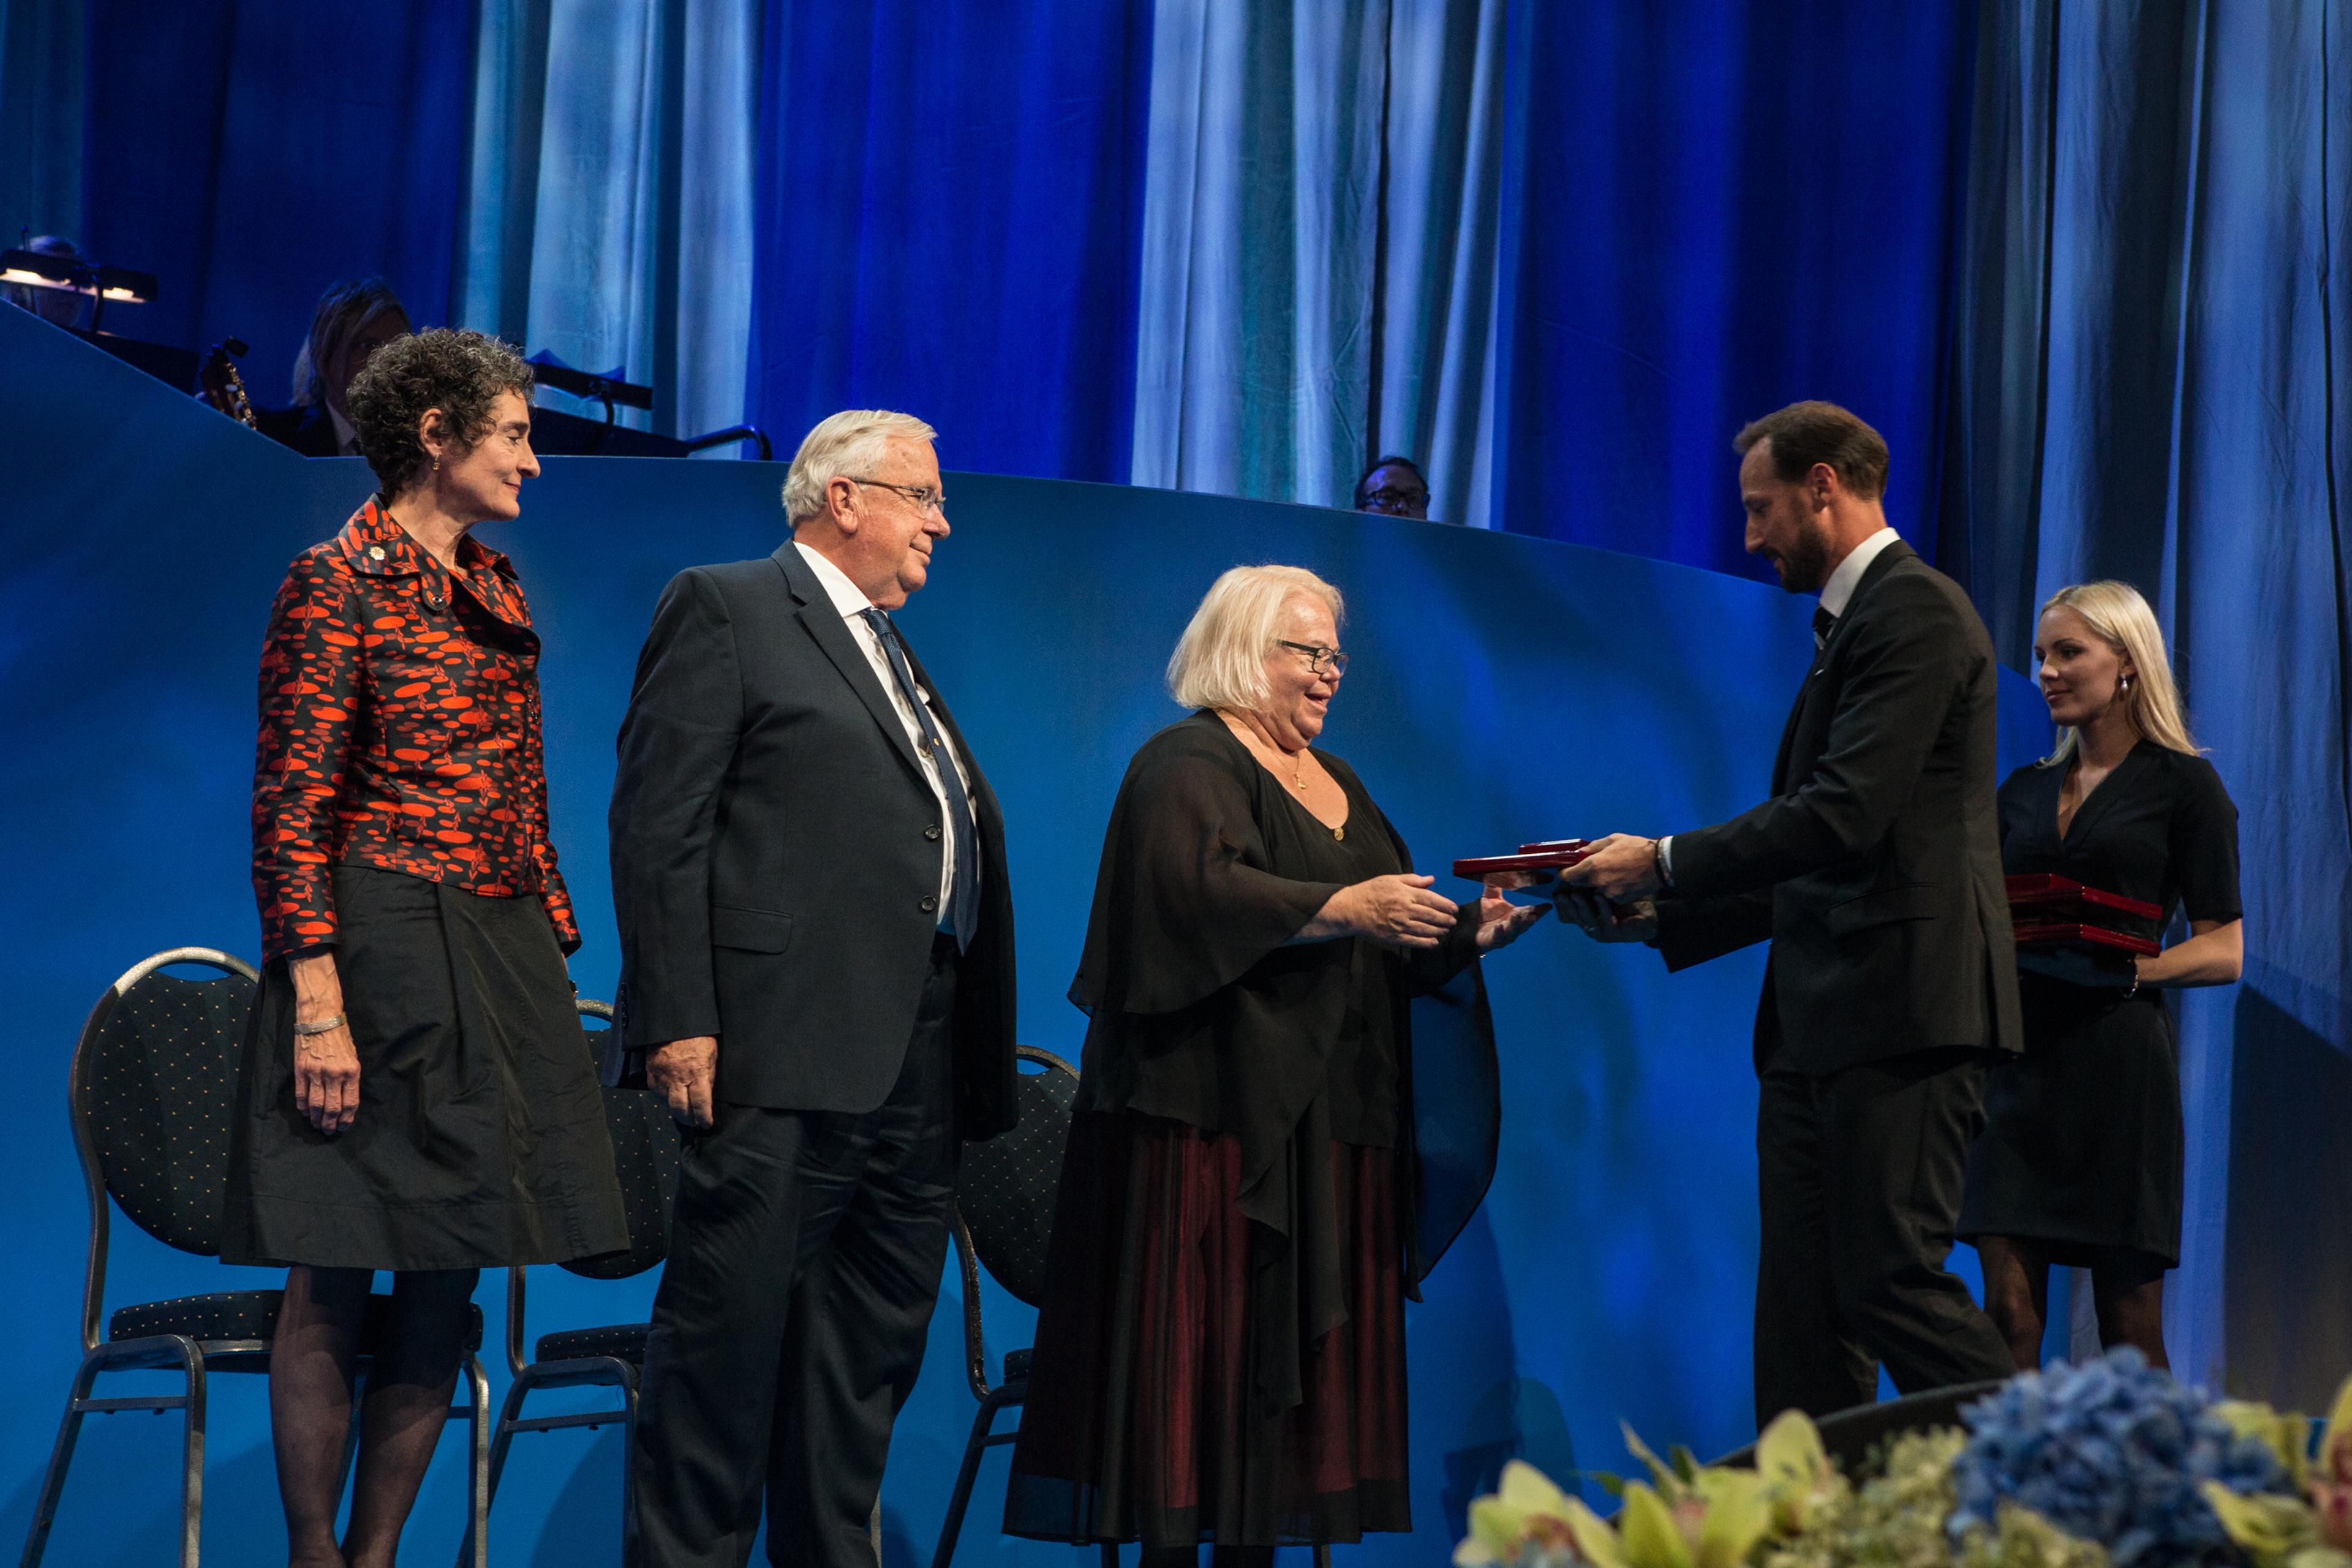 The three neuroscience laureates on stage at the ceremony in Oslo receiving their awards; from left: Carla J. Shatz, Michael M. Merzenich, Eve Marder and His Royal Highness Crown Prince Haakon 